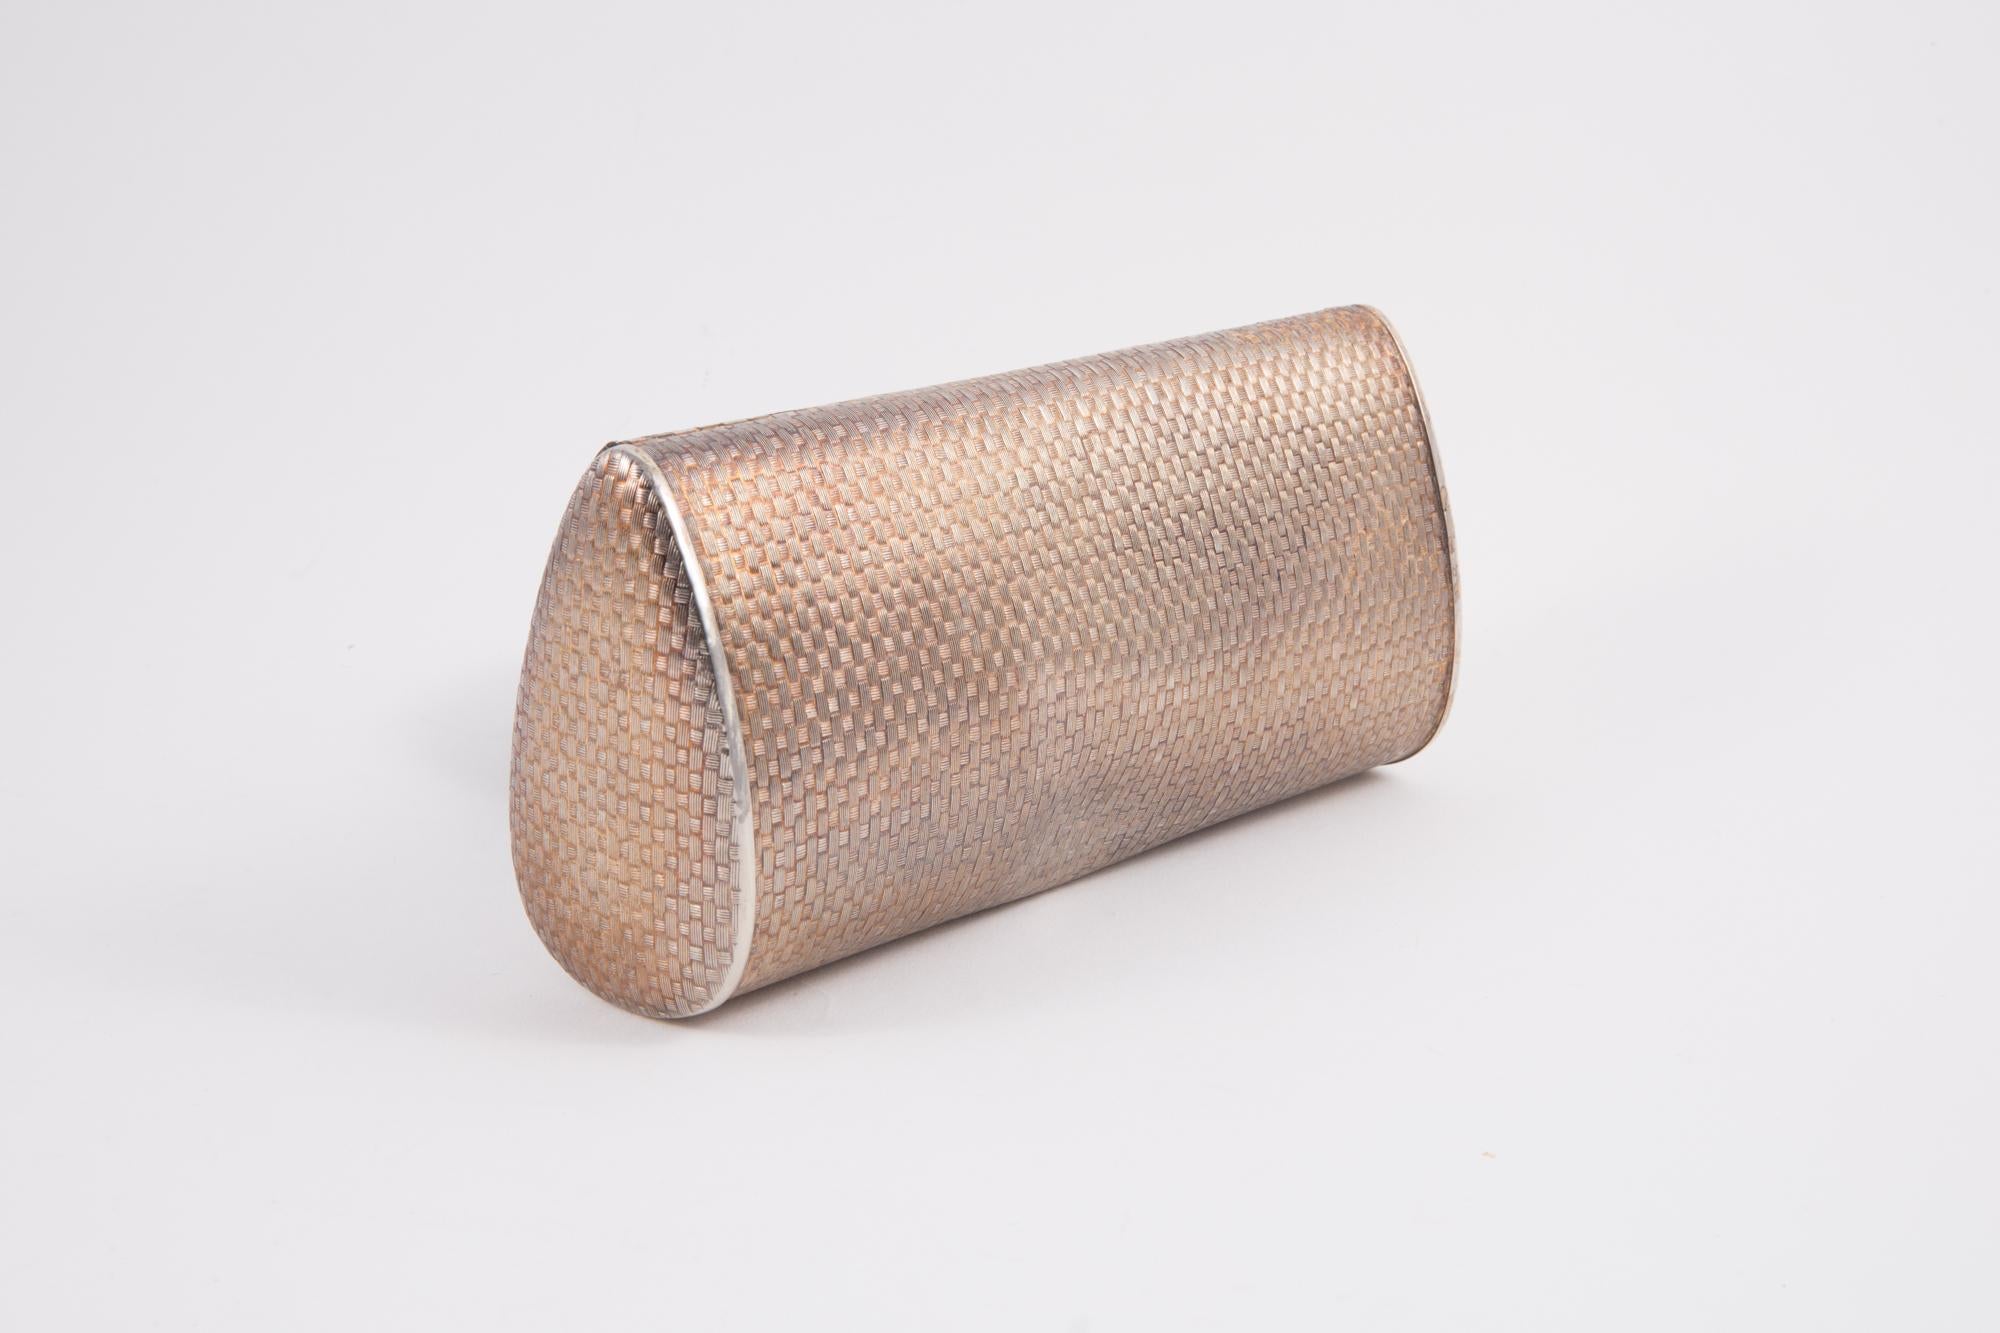 1970s Pink gold-tone metal box minaudière evening clutch featuring a woven textured metal effect, an inside small mirror, an inside camel velvet lining.   
Length 7in. (18 cm)
Height 3.5in. (9cm)
Depth 1.9in. (5cm)
In good vintage condition. Made in